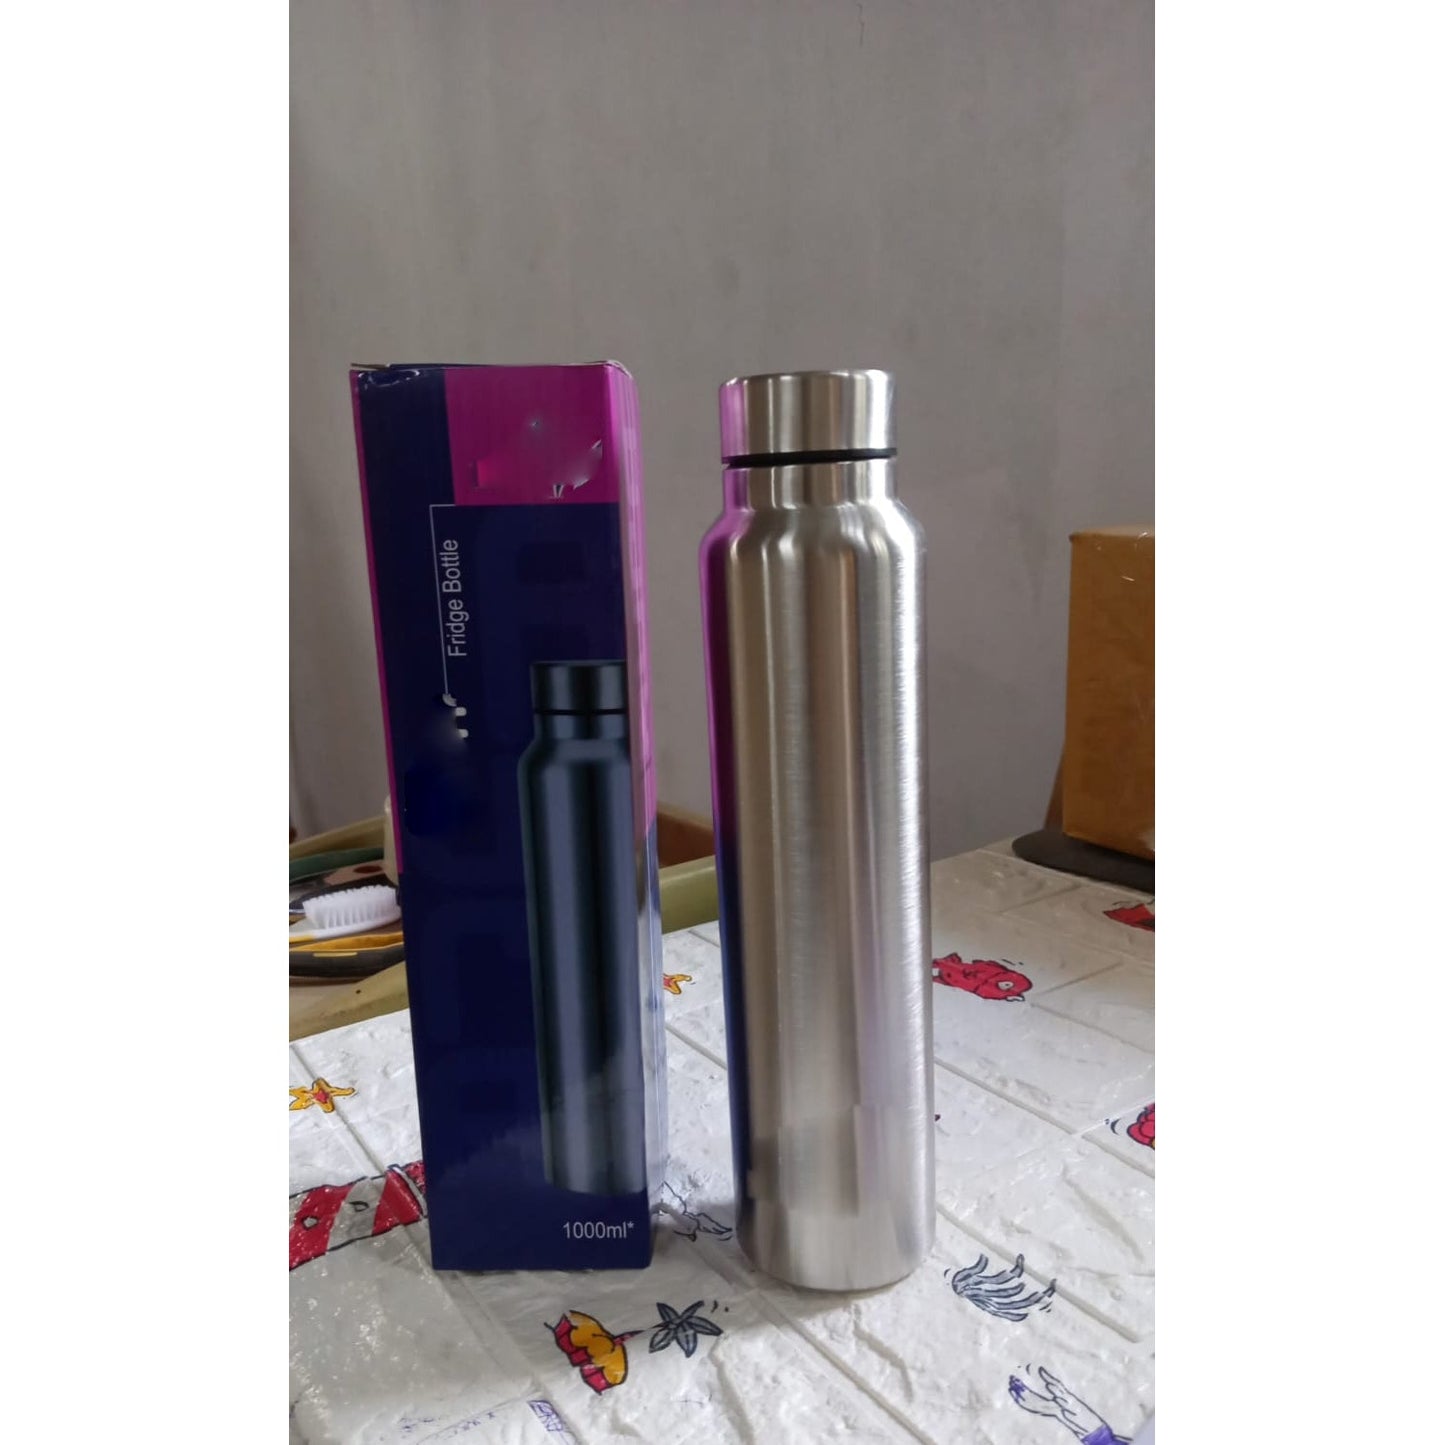 Stainless Steel Water Bottle, Fridge Water Bottle, Stainless Steel Water Bottle Leak Proof, Rust Proof, Hot & Cold Drinks, Gym Sipper BPA Free Food Grade Quality Silver Color, Steel fridge Bottle For office/Gym/School 1000ml